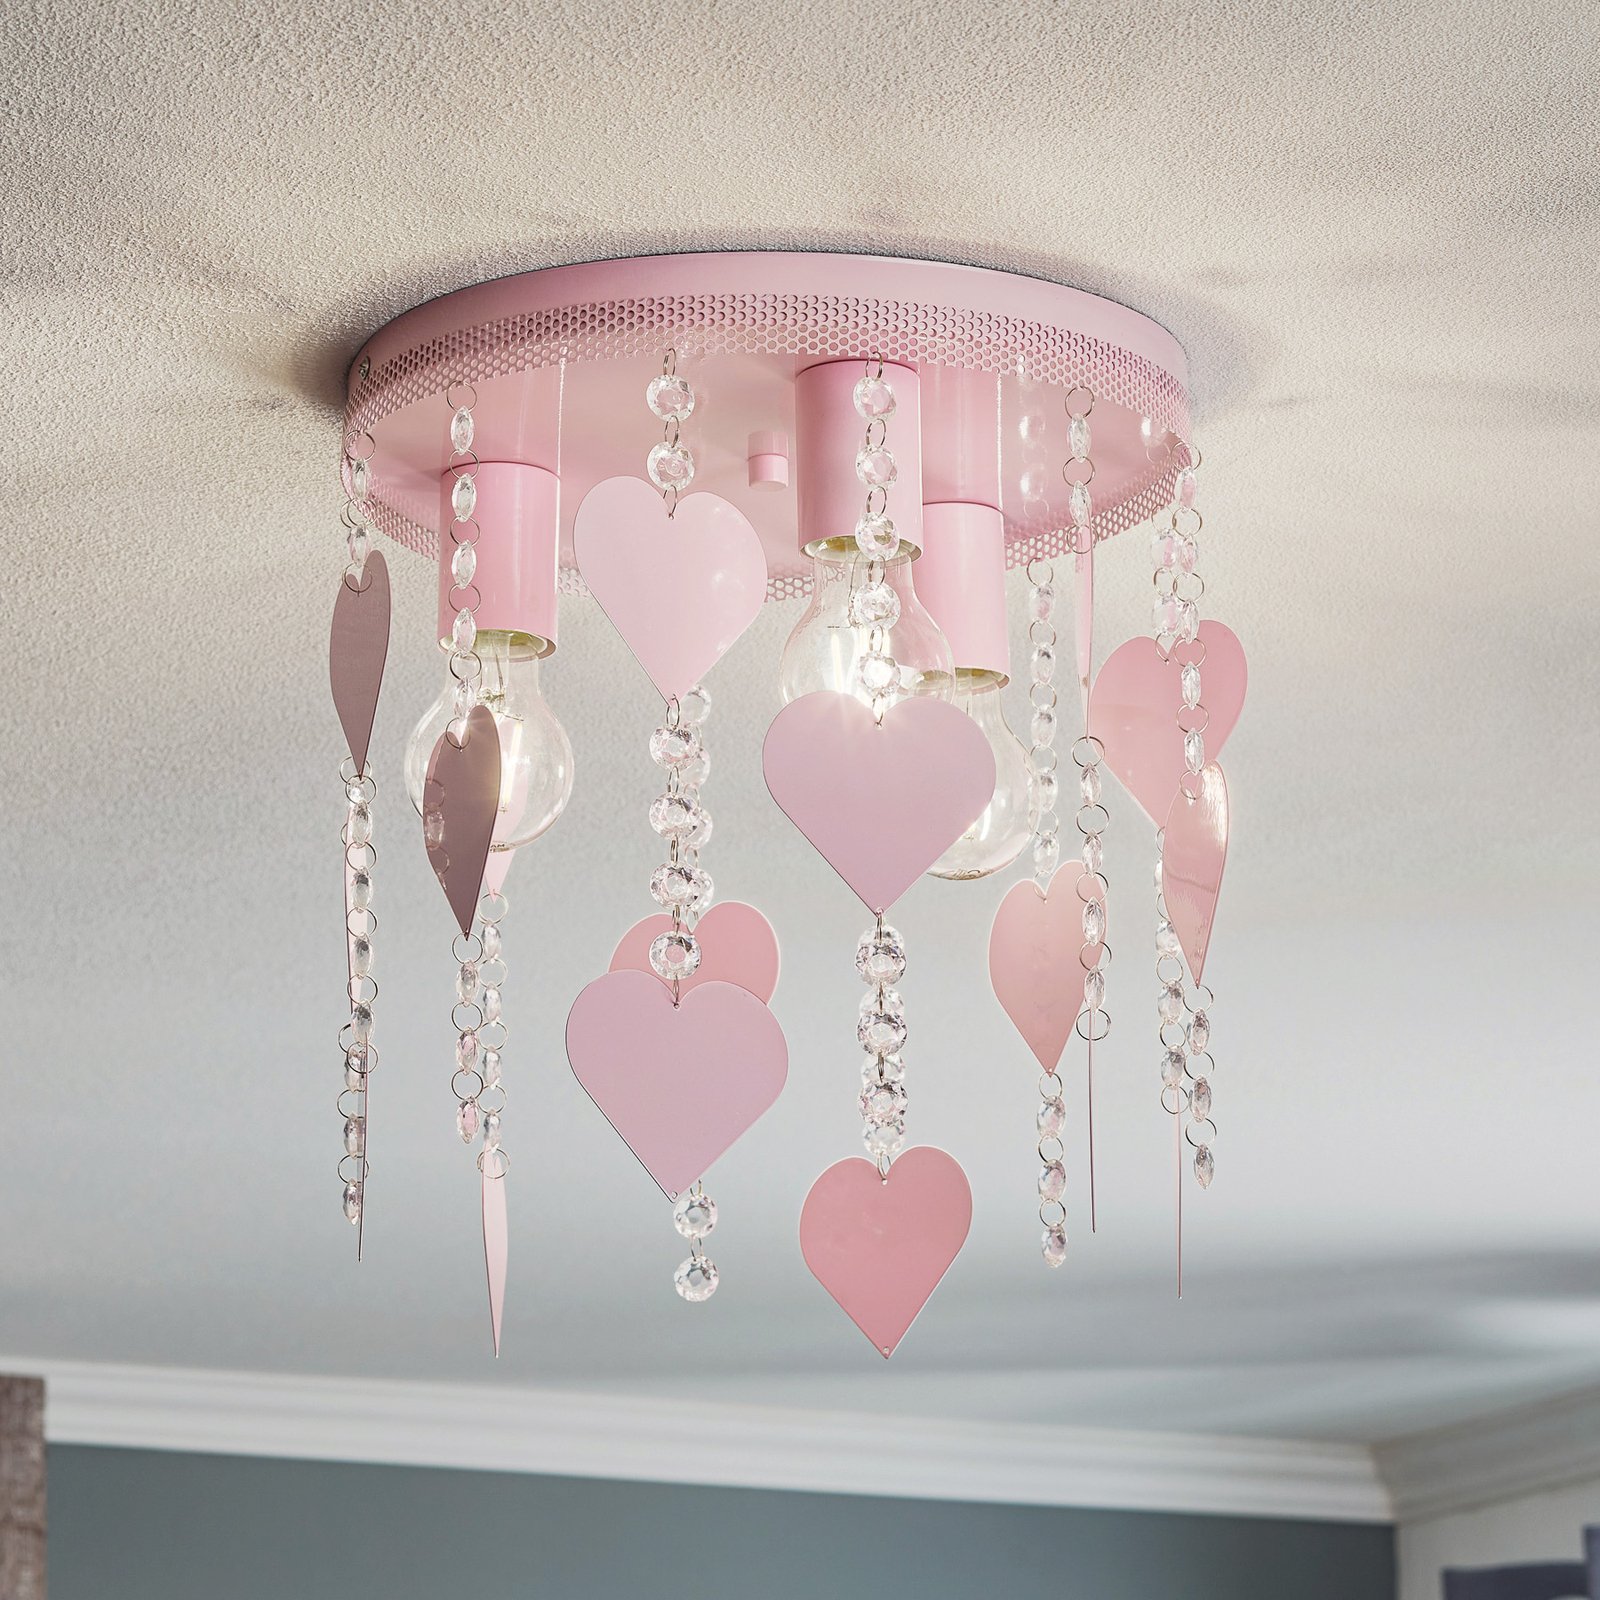 Corazon ceiling light in magenta with heart